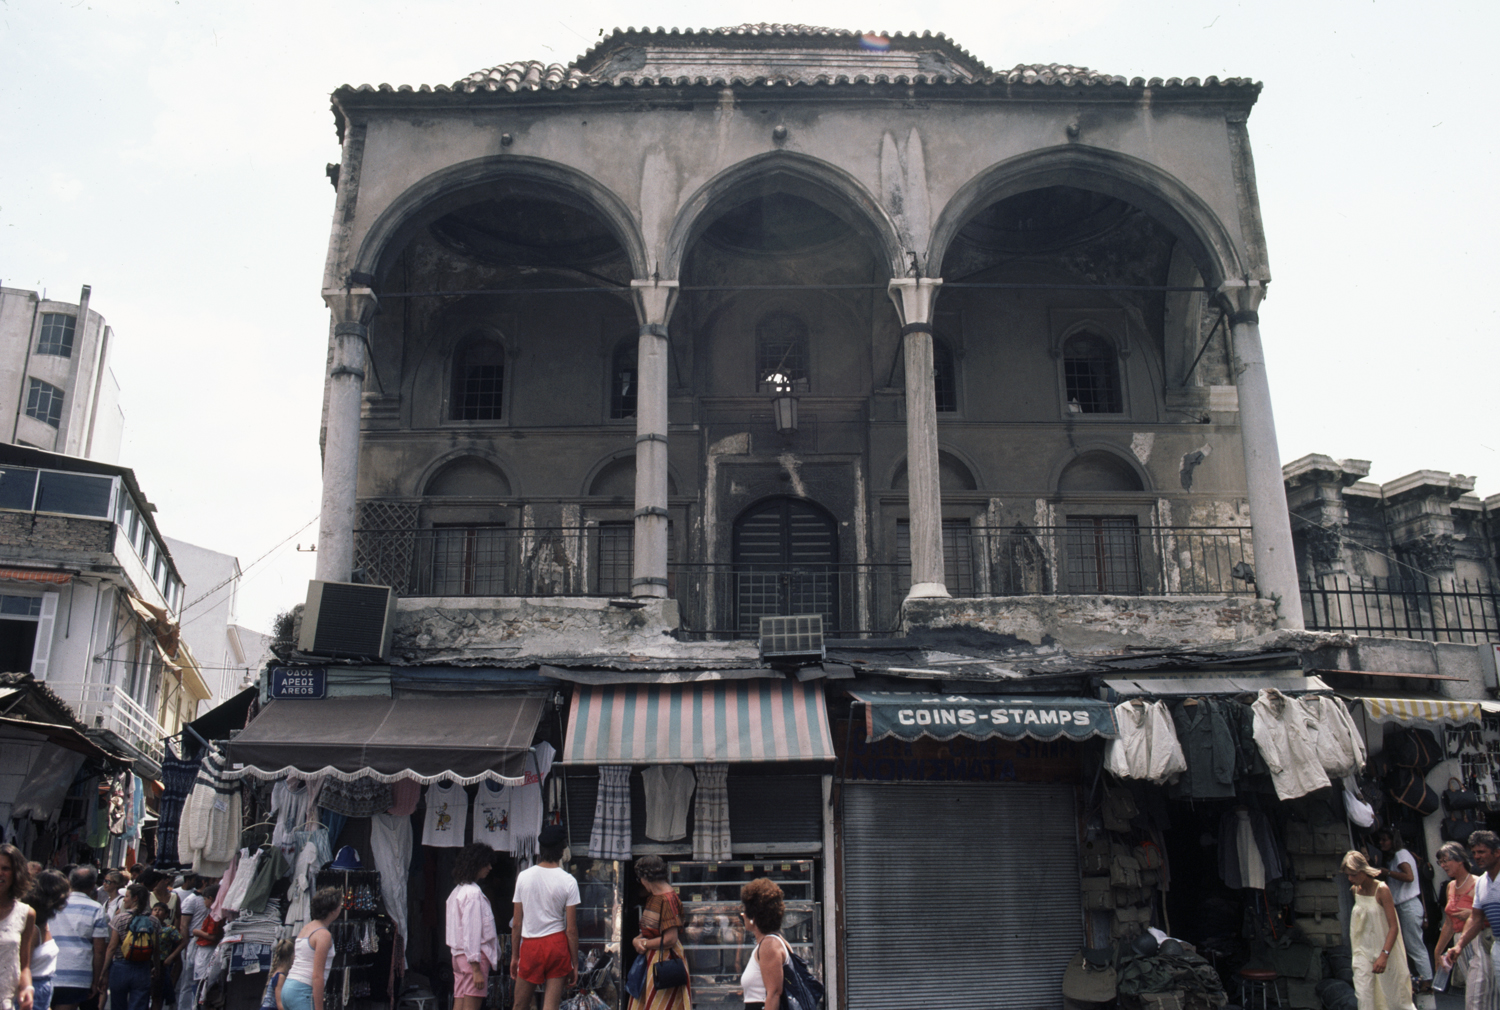 View from street level of front of mosque, with portico above shops at street level